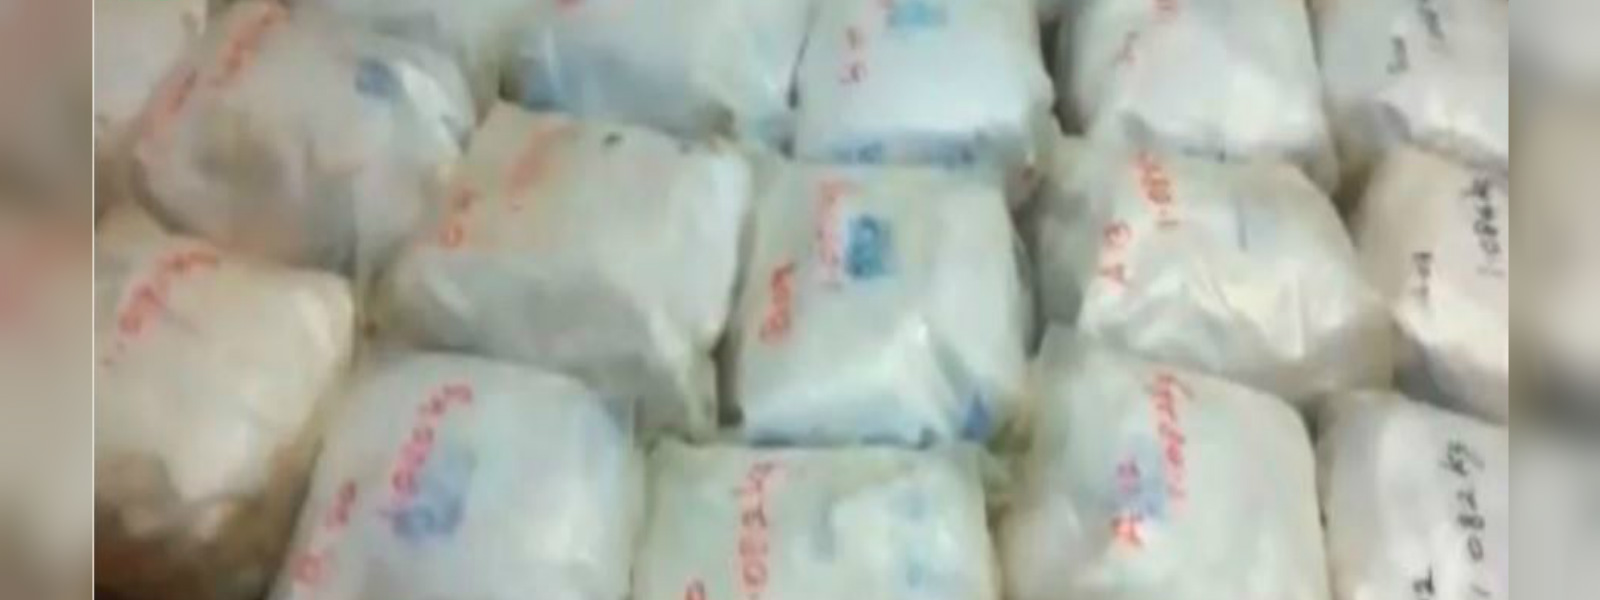 Beruwala heroin haul suspects further remanded